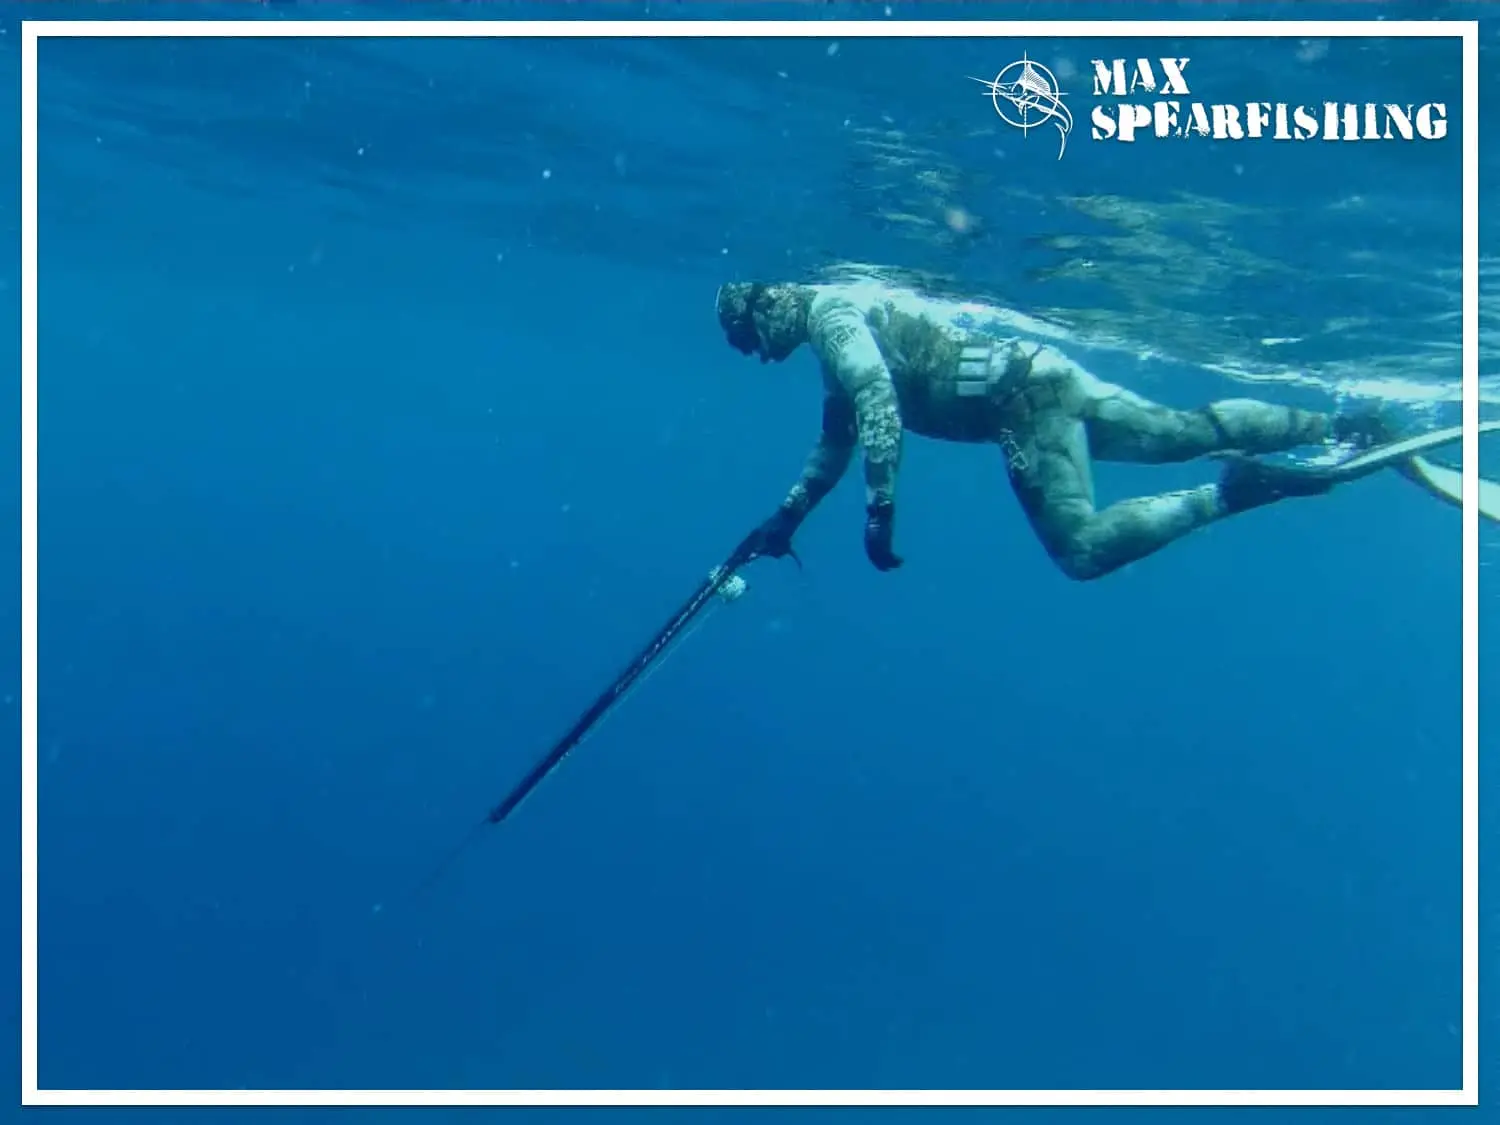 there are many types of spearfishing